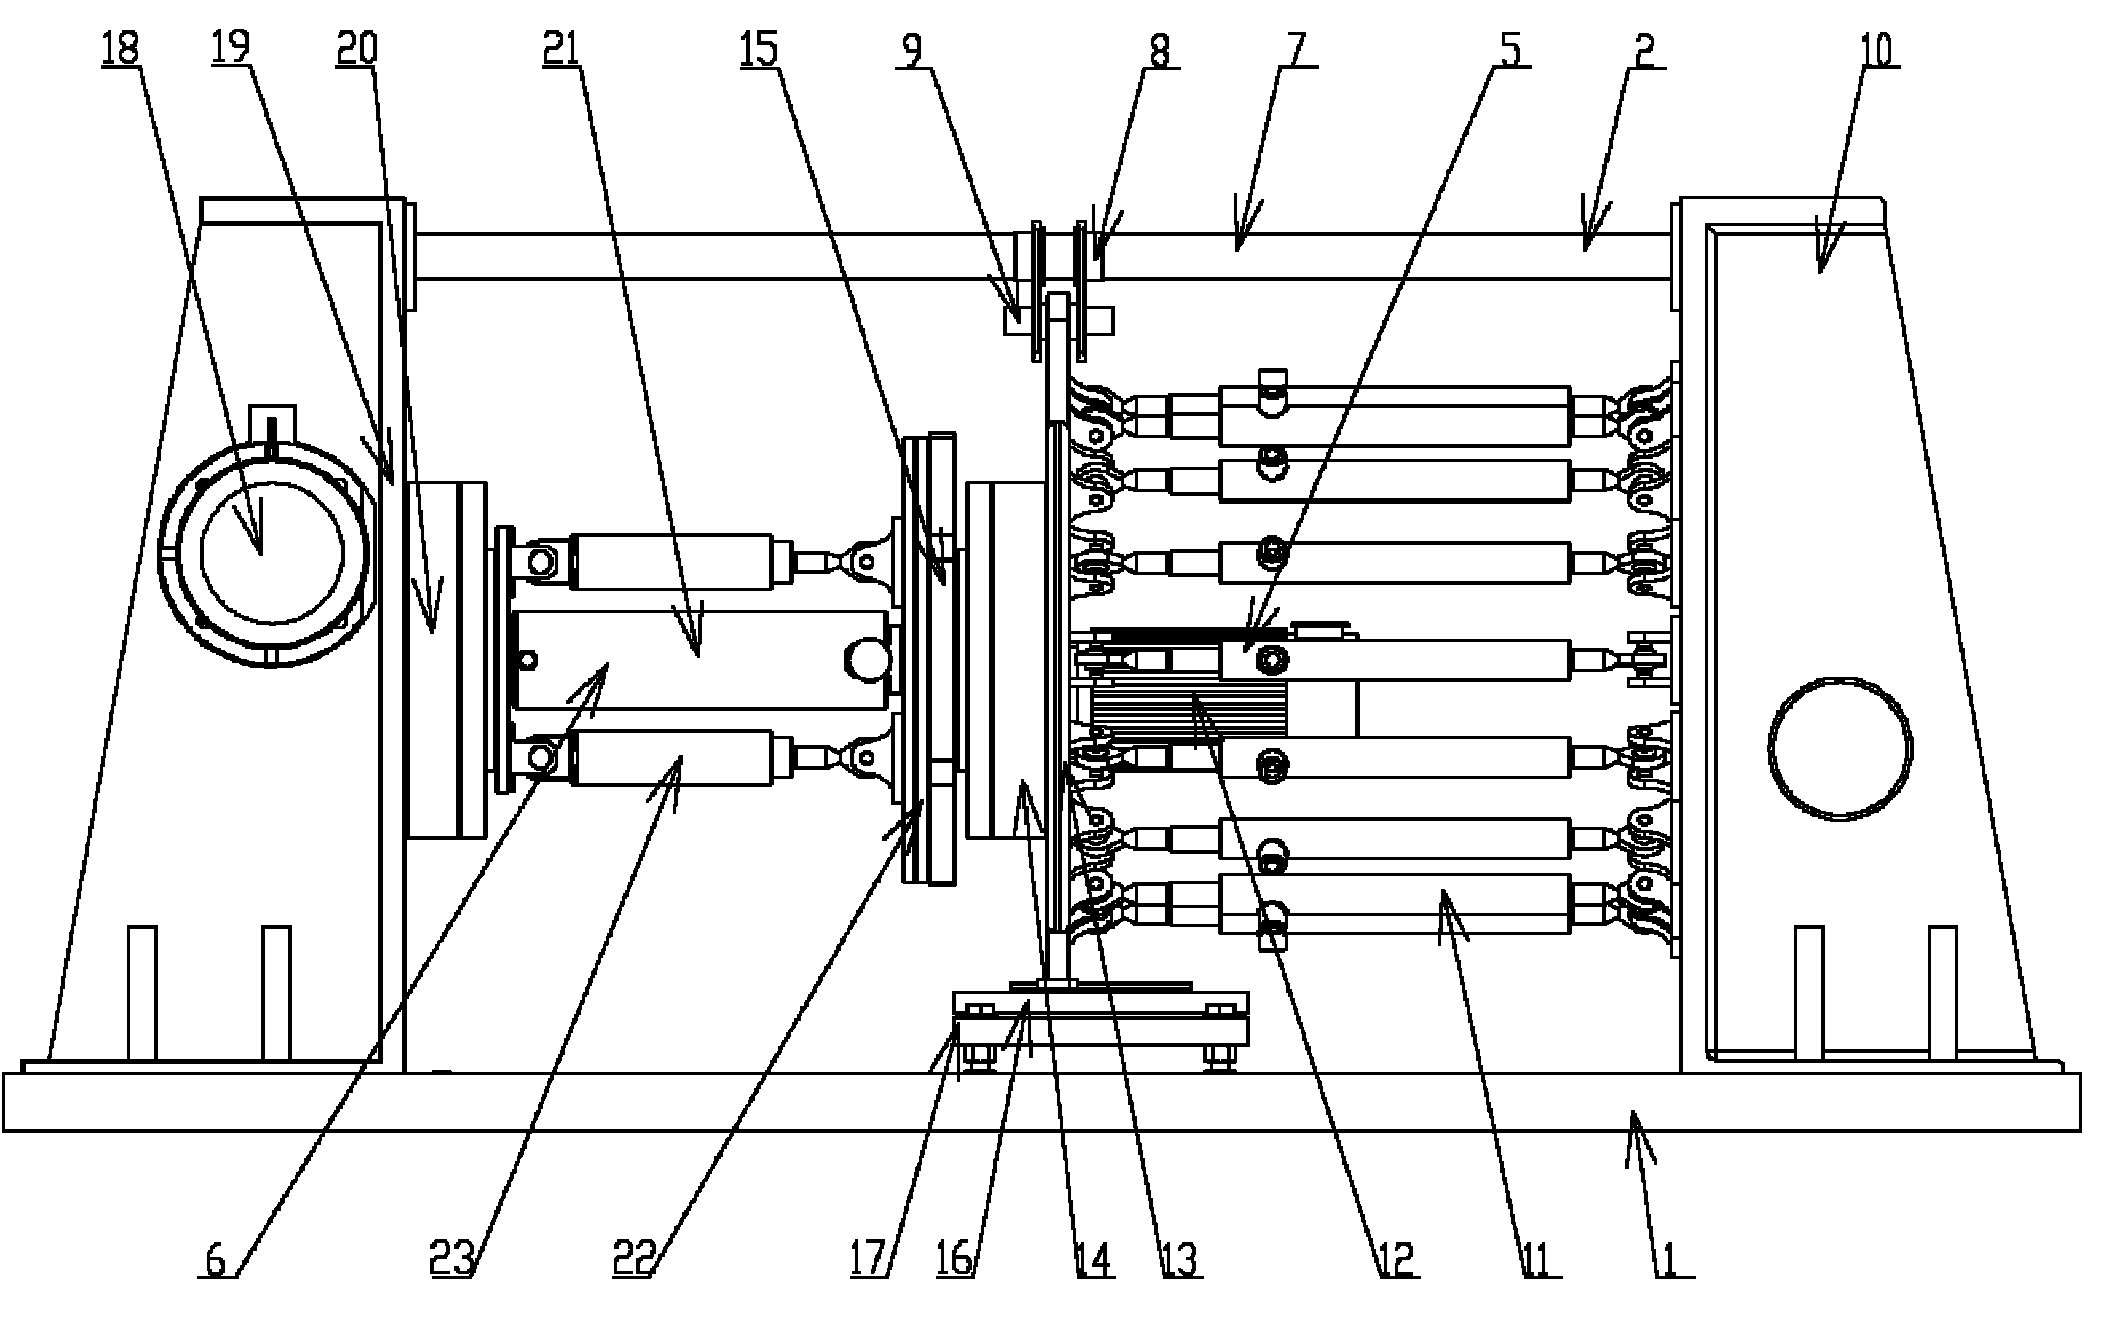 Device for testing force transmission characteristics of tunnellers